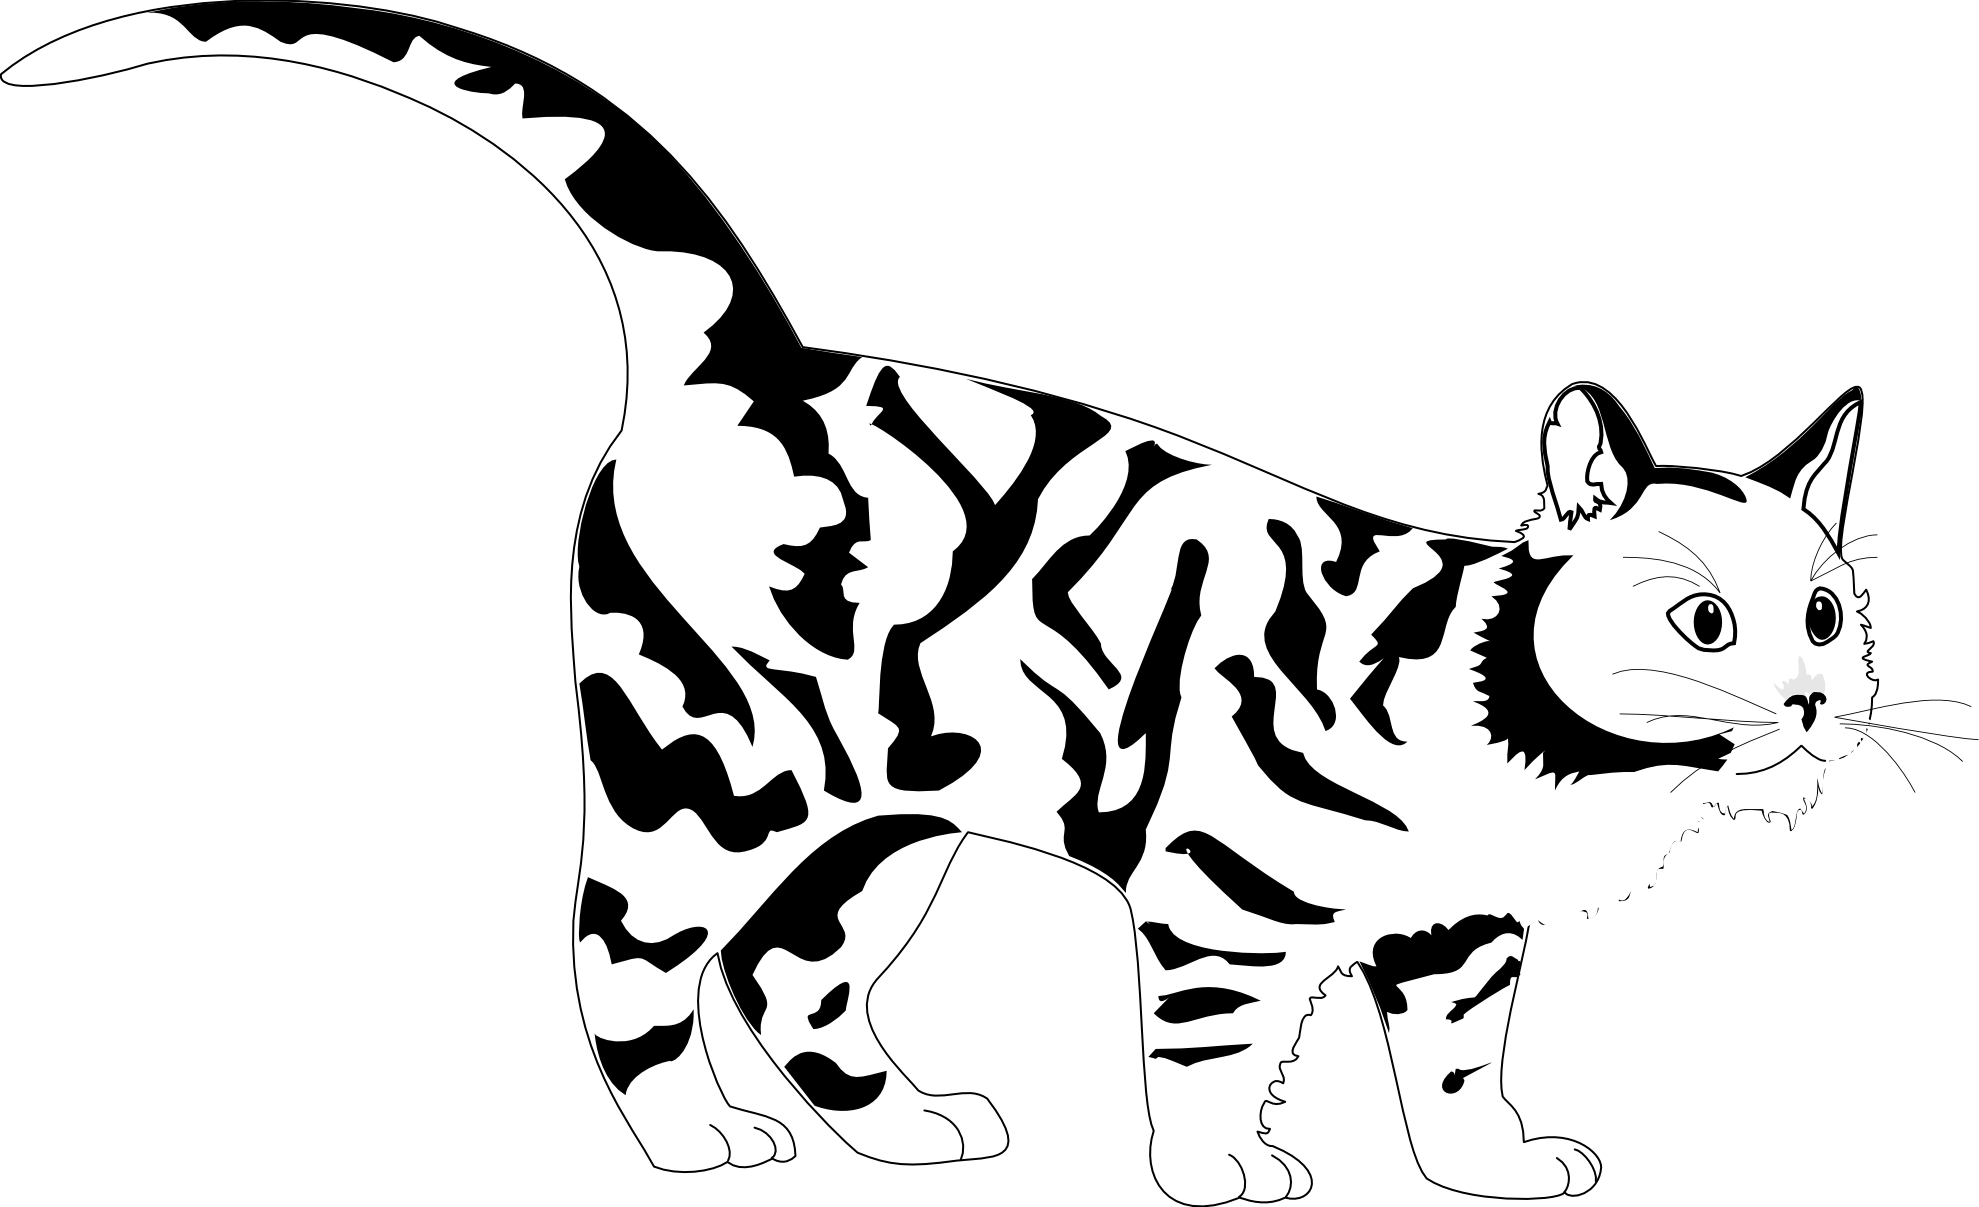 Tiger Cat Black White Line Art Coloring Sheet Colouring Page.